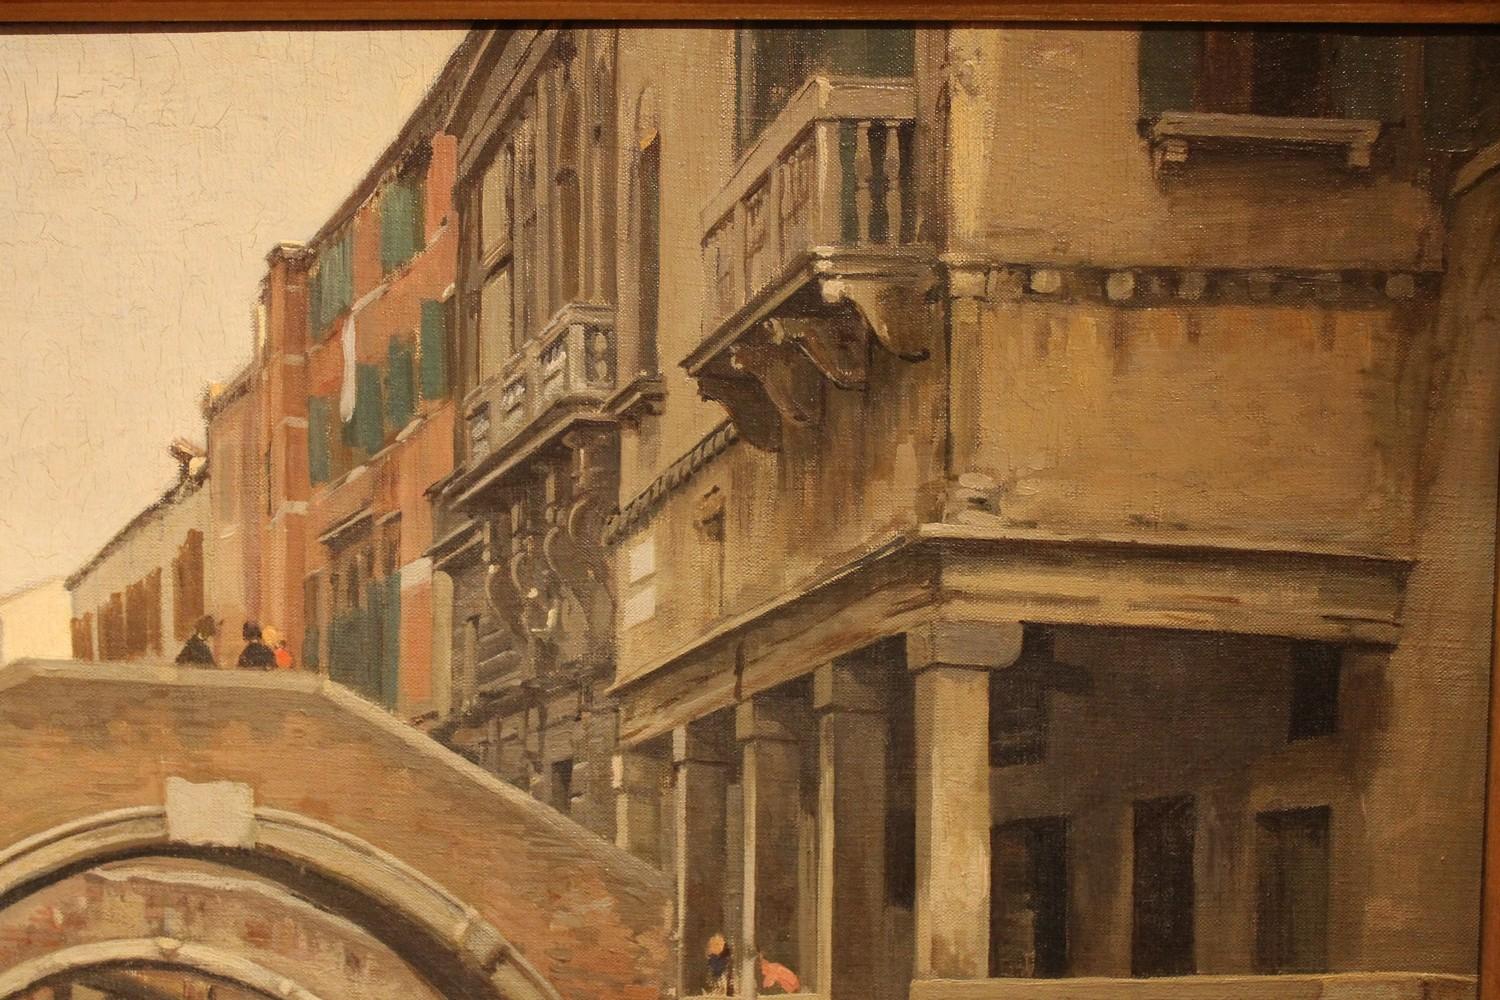 View of Canal in Venice Landscape with Architectures Oil on Canvas Painting - Brown Landscape Painting by Vincenzo Caprile